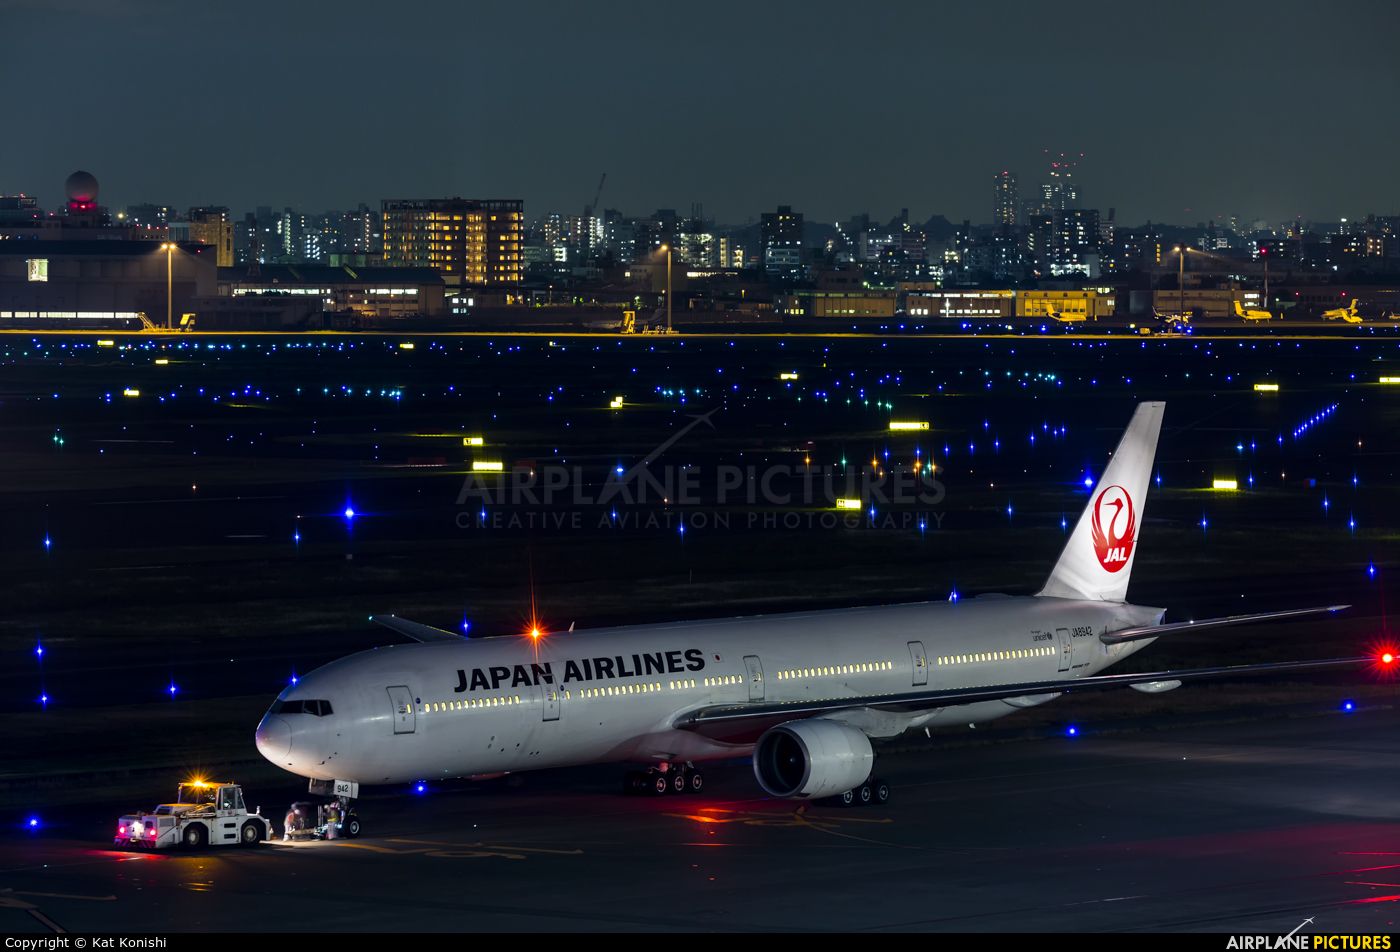 High Quality Photo Of JAL Airlines Boeing 777 300 By Kat Konishi. Visit Airplane Picture.net For Creative Aviation. Boeing Boeing 777 Airlines